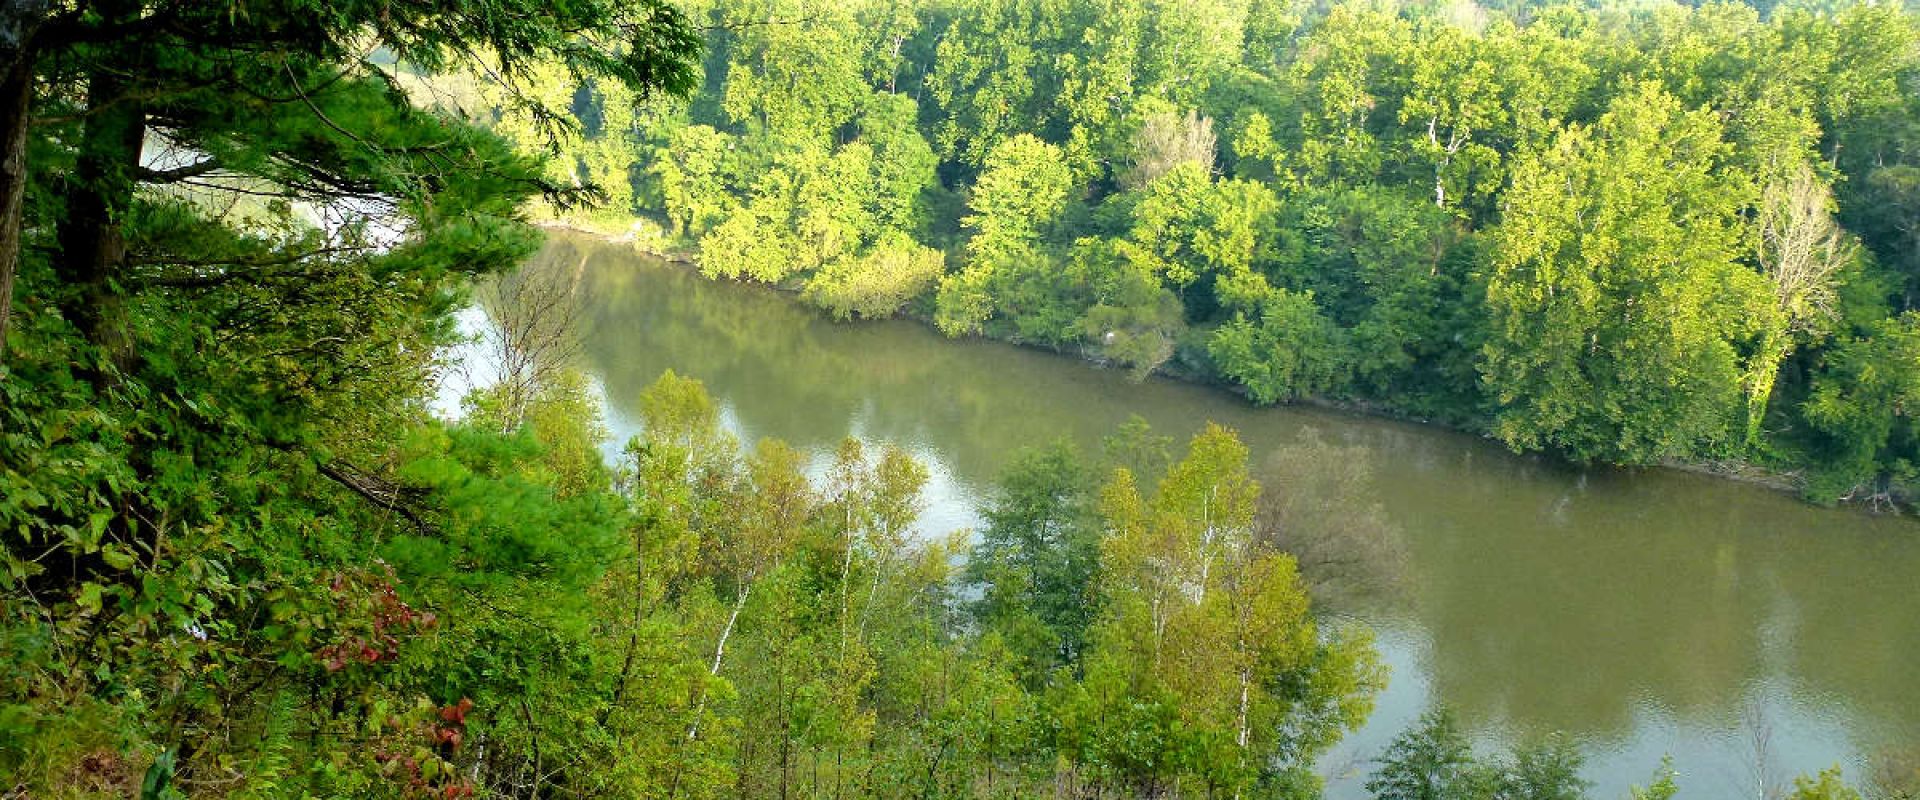 The view from the edge of Komoka Bluff looking down towards a forested section of the Thames River.